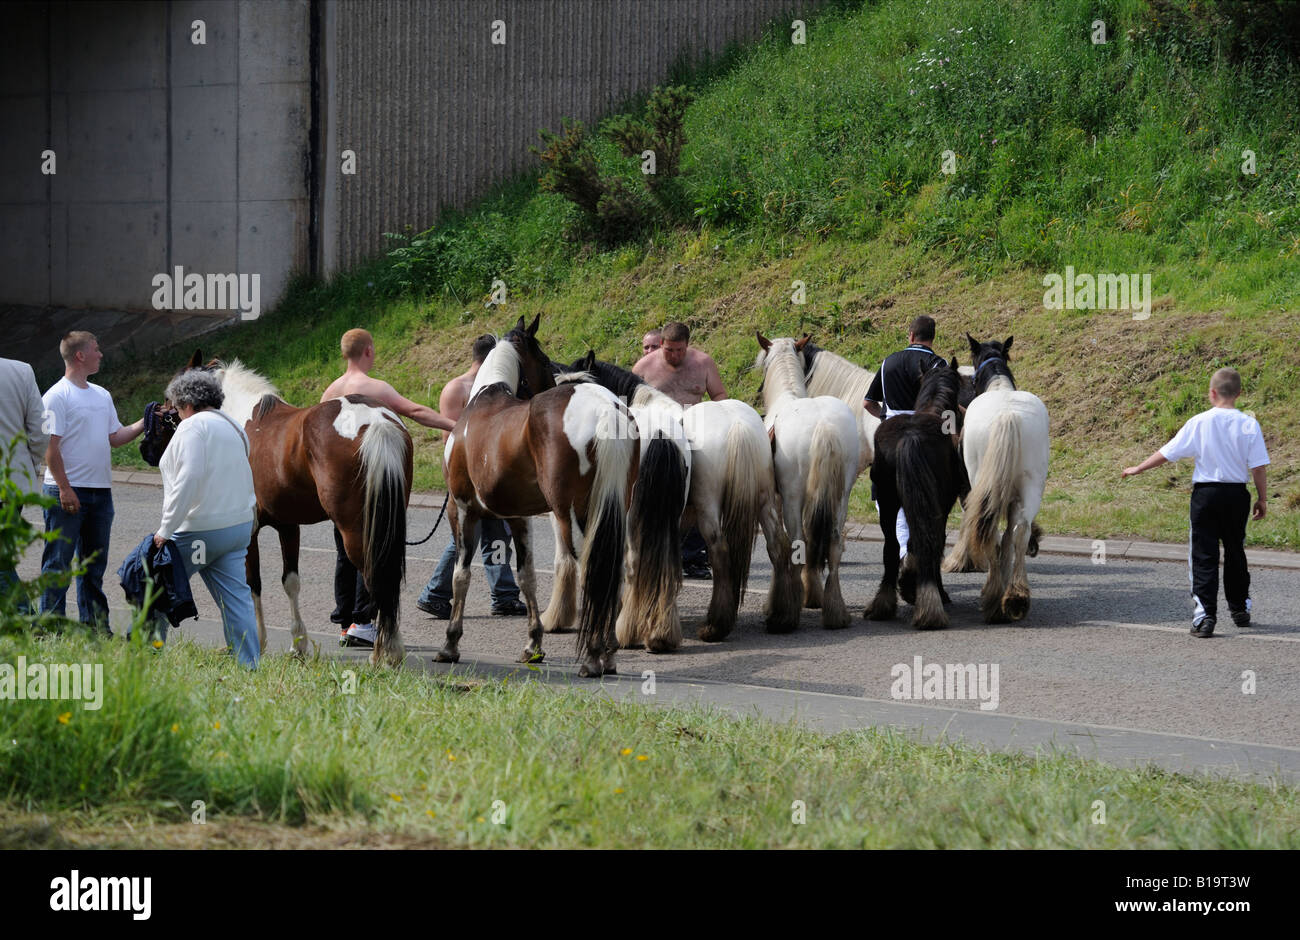 Gypsy travellers with horses. Appleby Horse Fair. Appleby-in-Westmorland, Cumbria, England, United Kingdom, Europe. Stock Photo